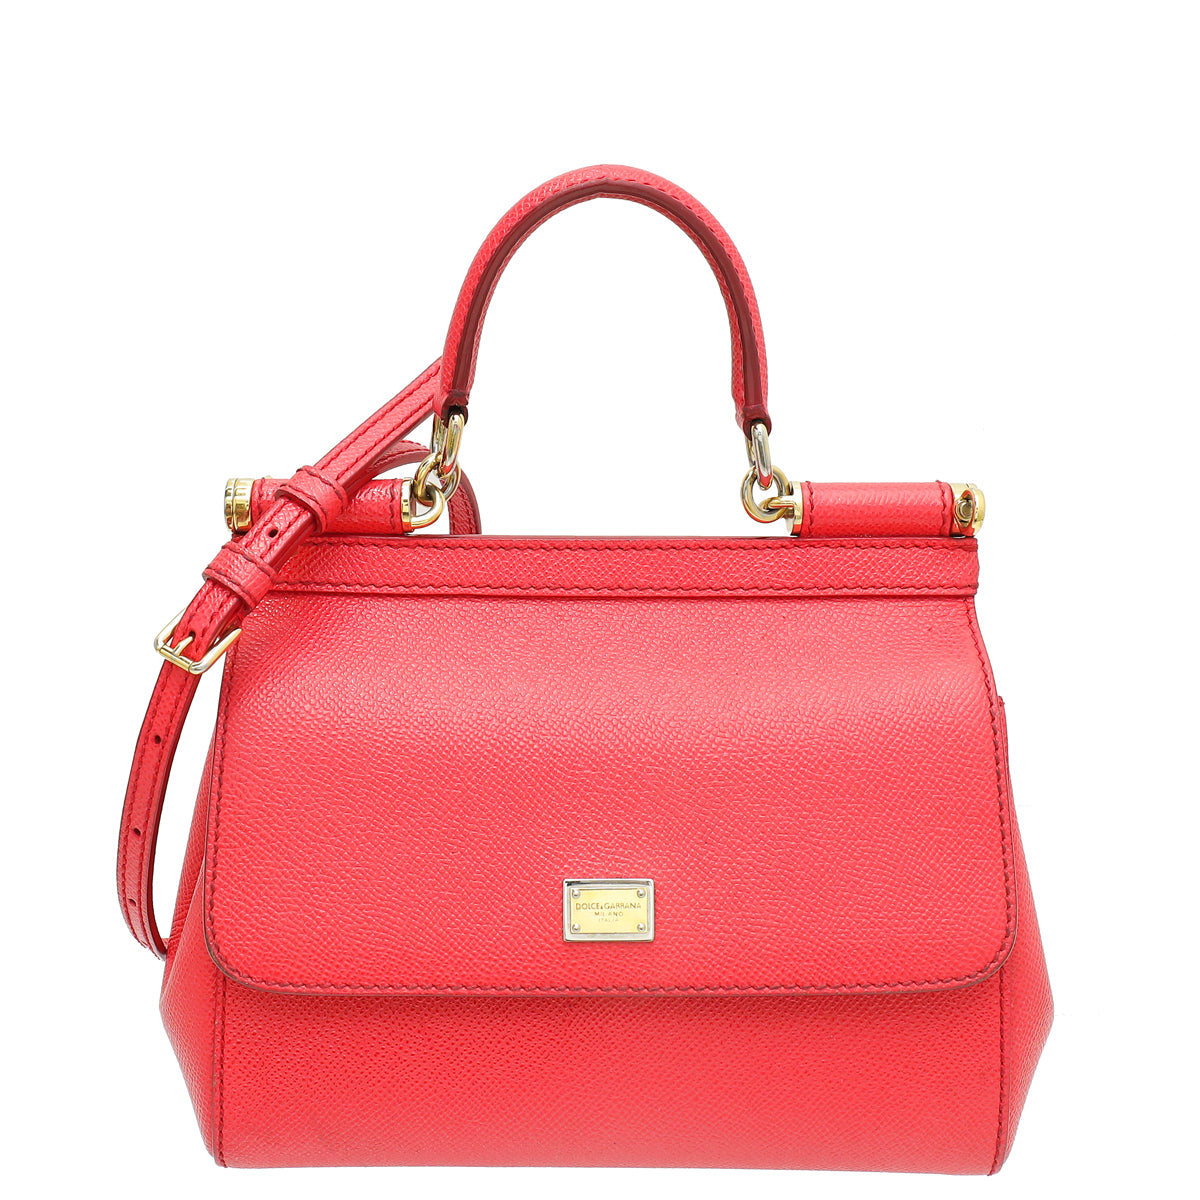 Dolce & Gabbana Red Dauphine Small Sicily Bag